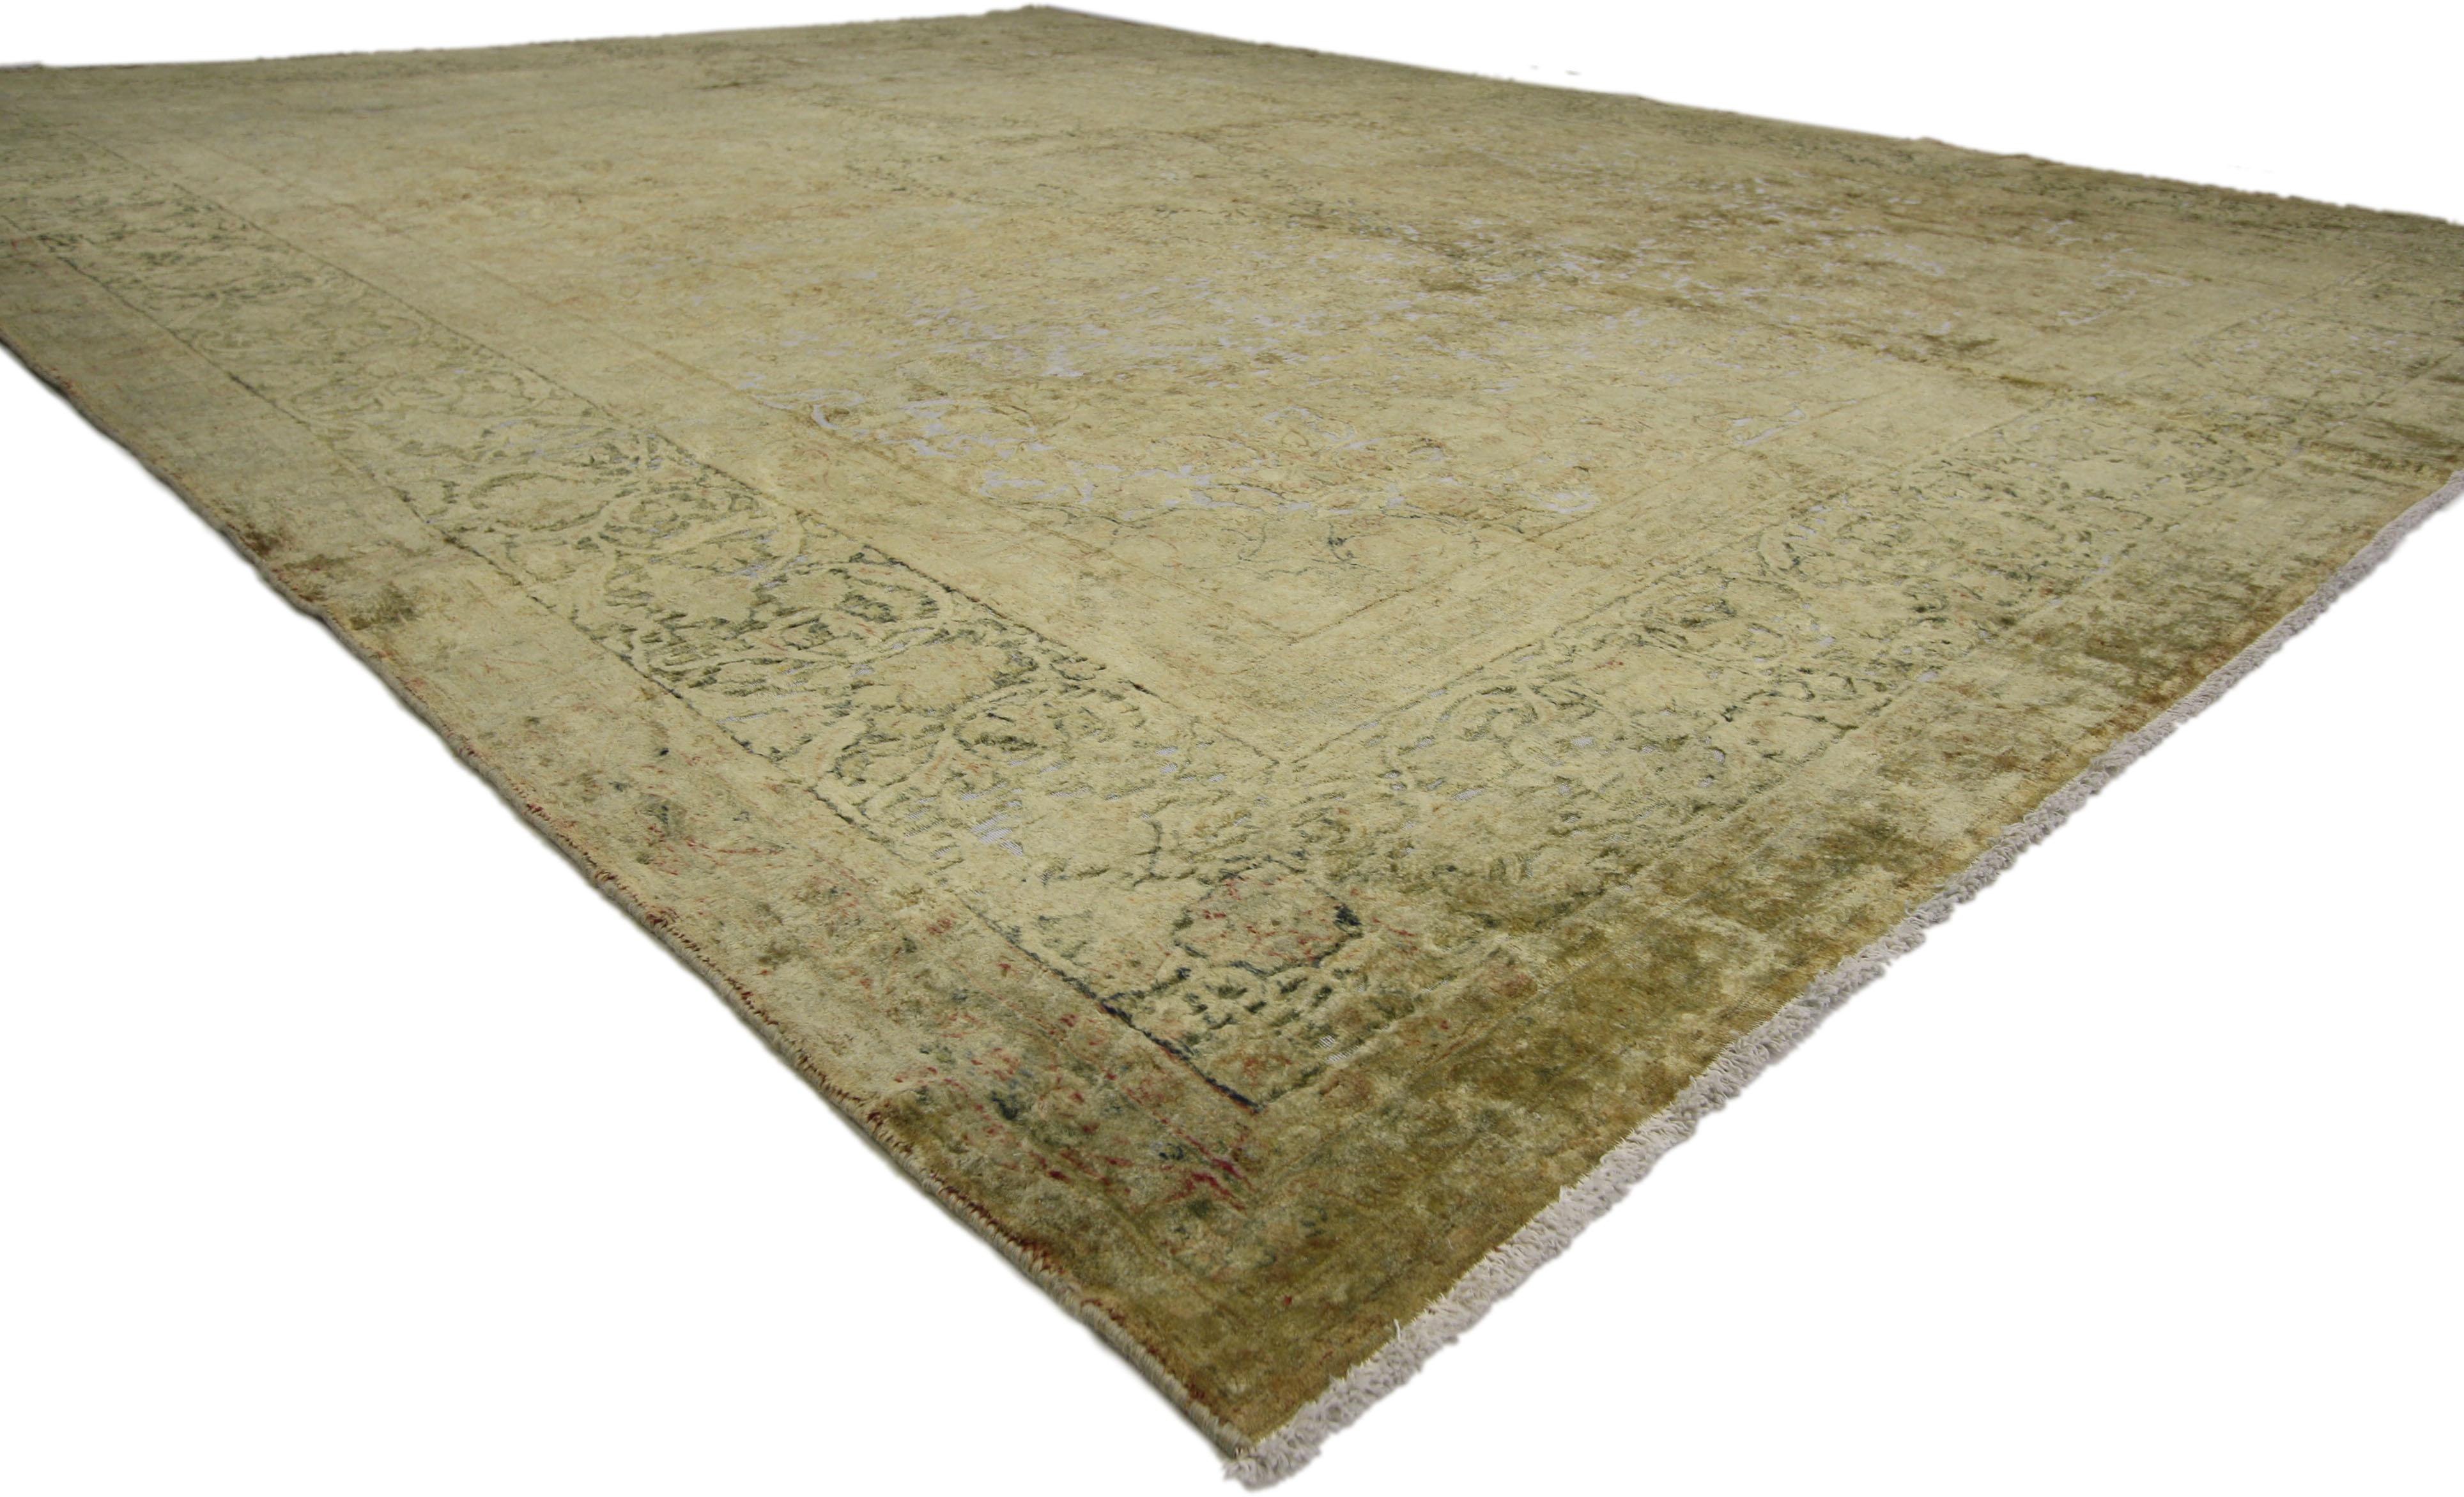 Hand-Knotted Distressed Vintage Turkish Rug with Rustic Modern Industrial Style